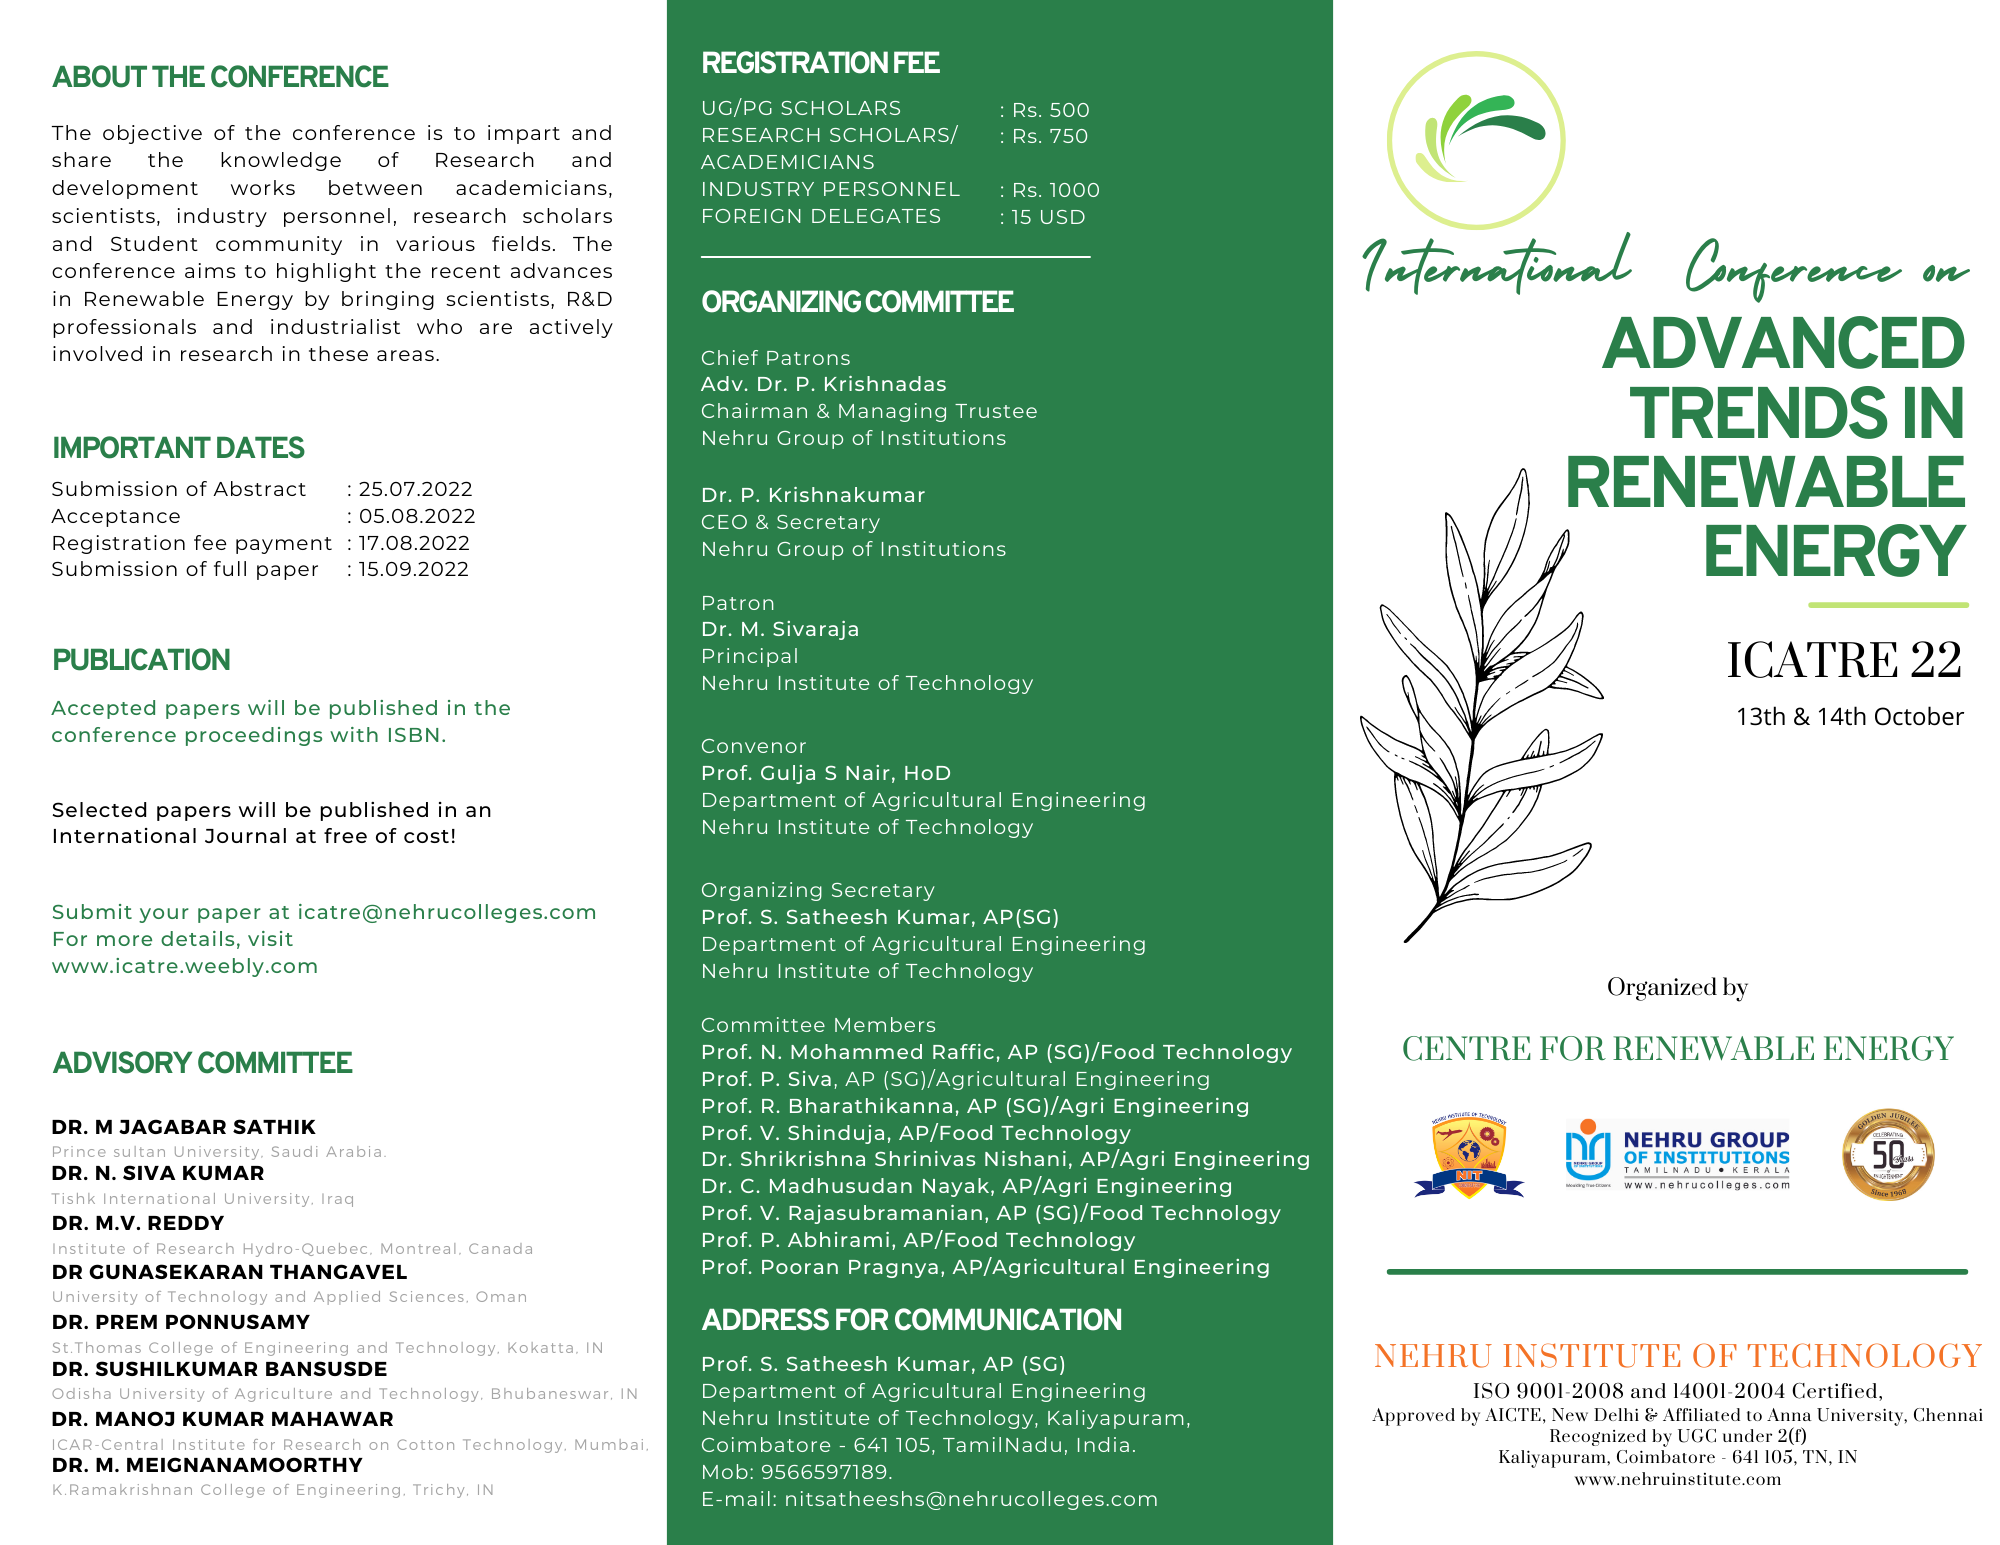 International Conference on Advanced Trends in Renewable Energy (ICATRE22)